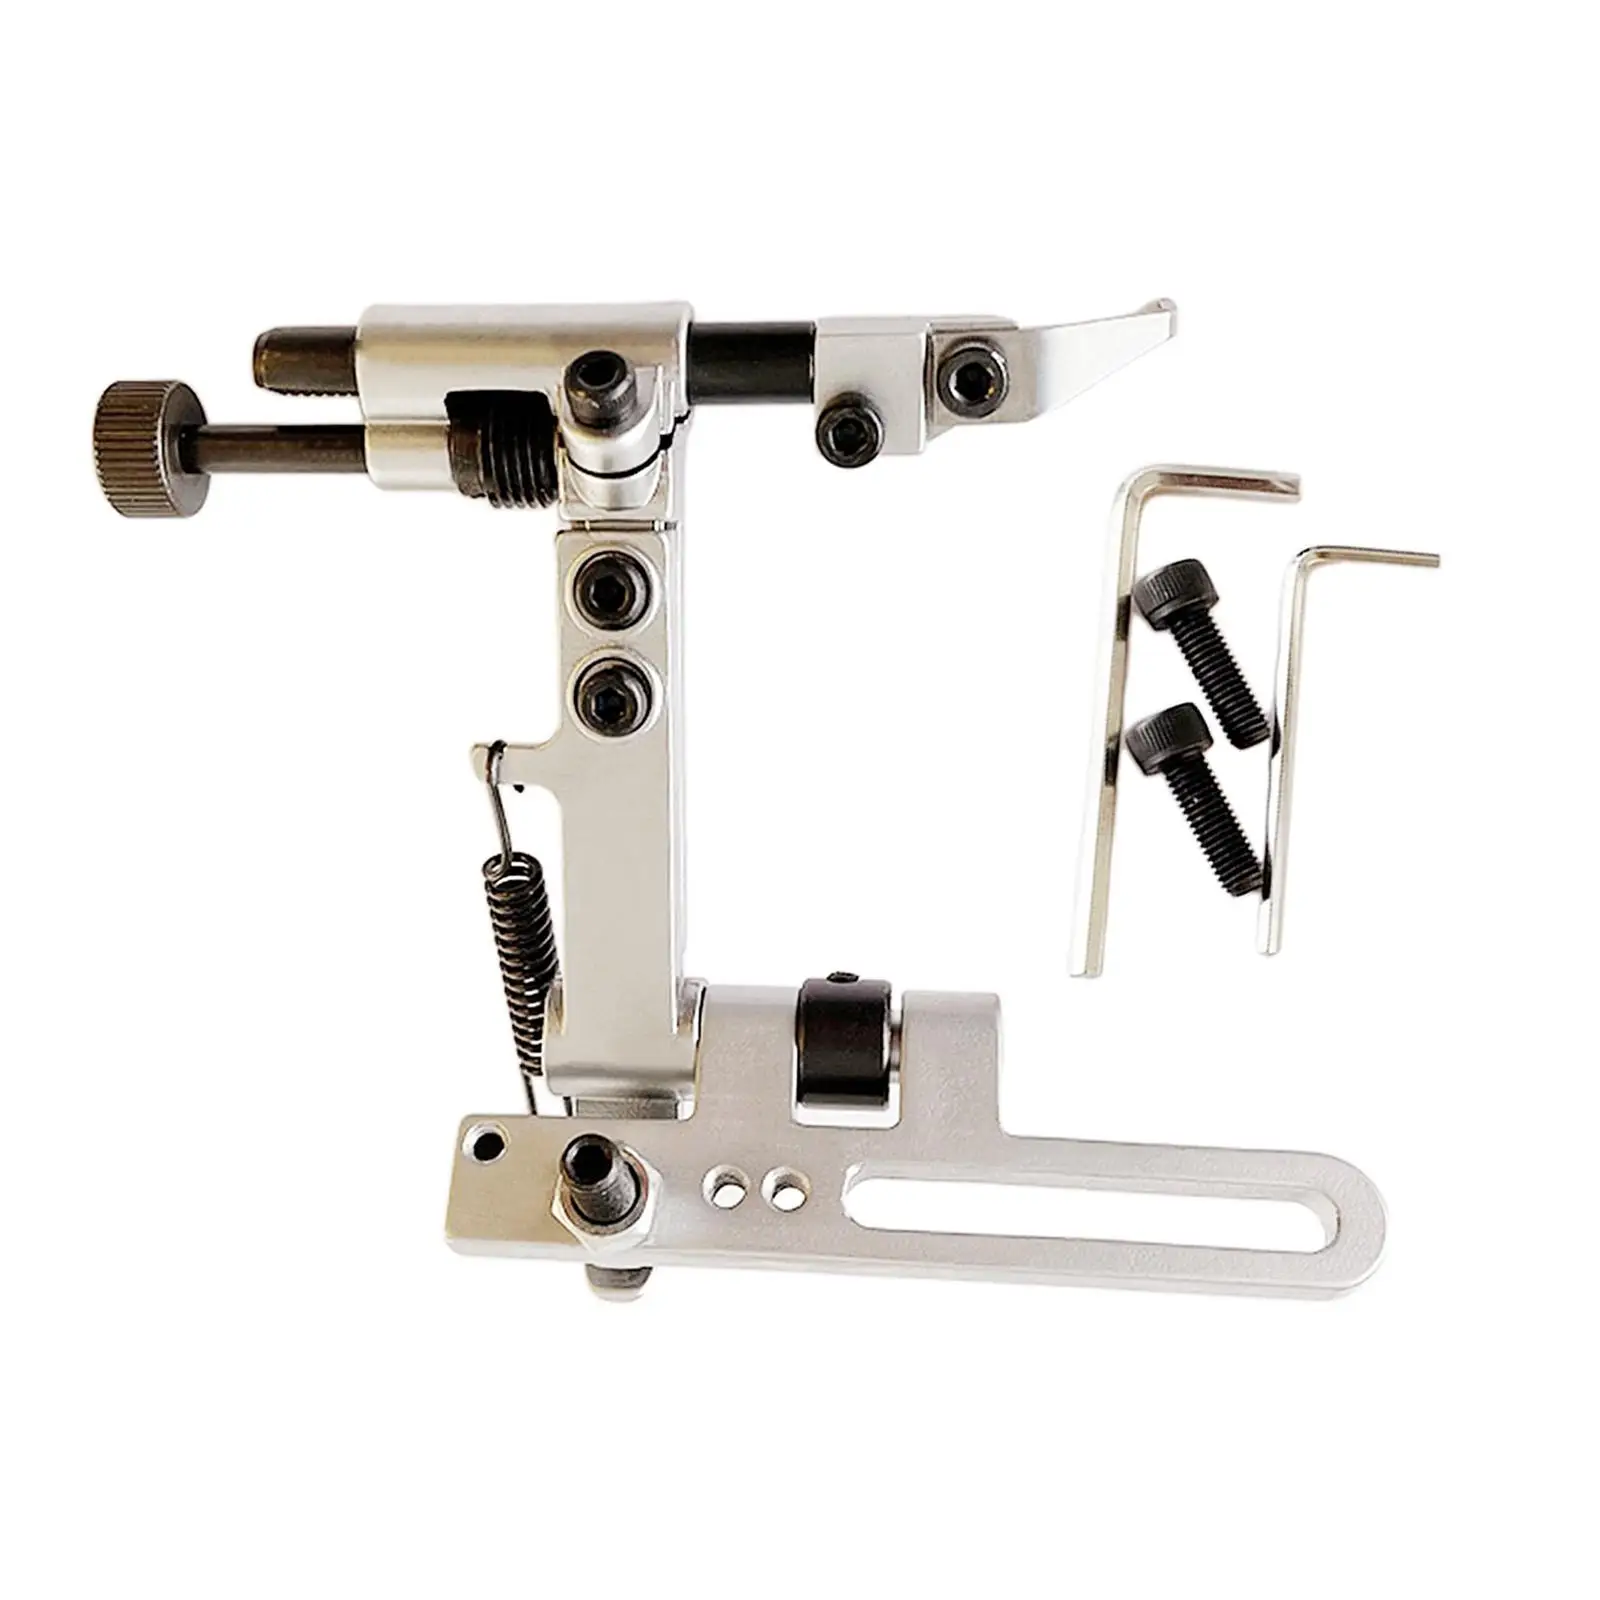 Sewing Machine Kit Suspending Edge Guide with Adaptor Bracket Durable Tool Parts Accessories Edge Guide Tool